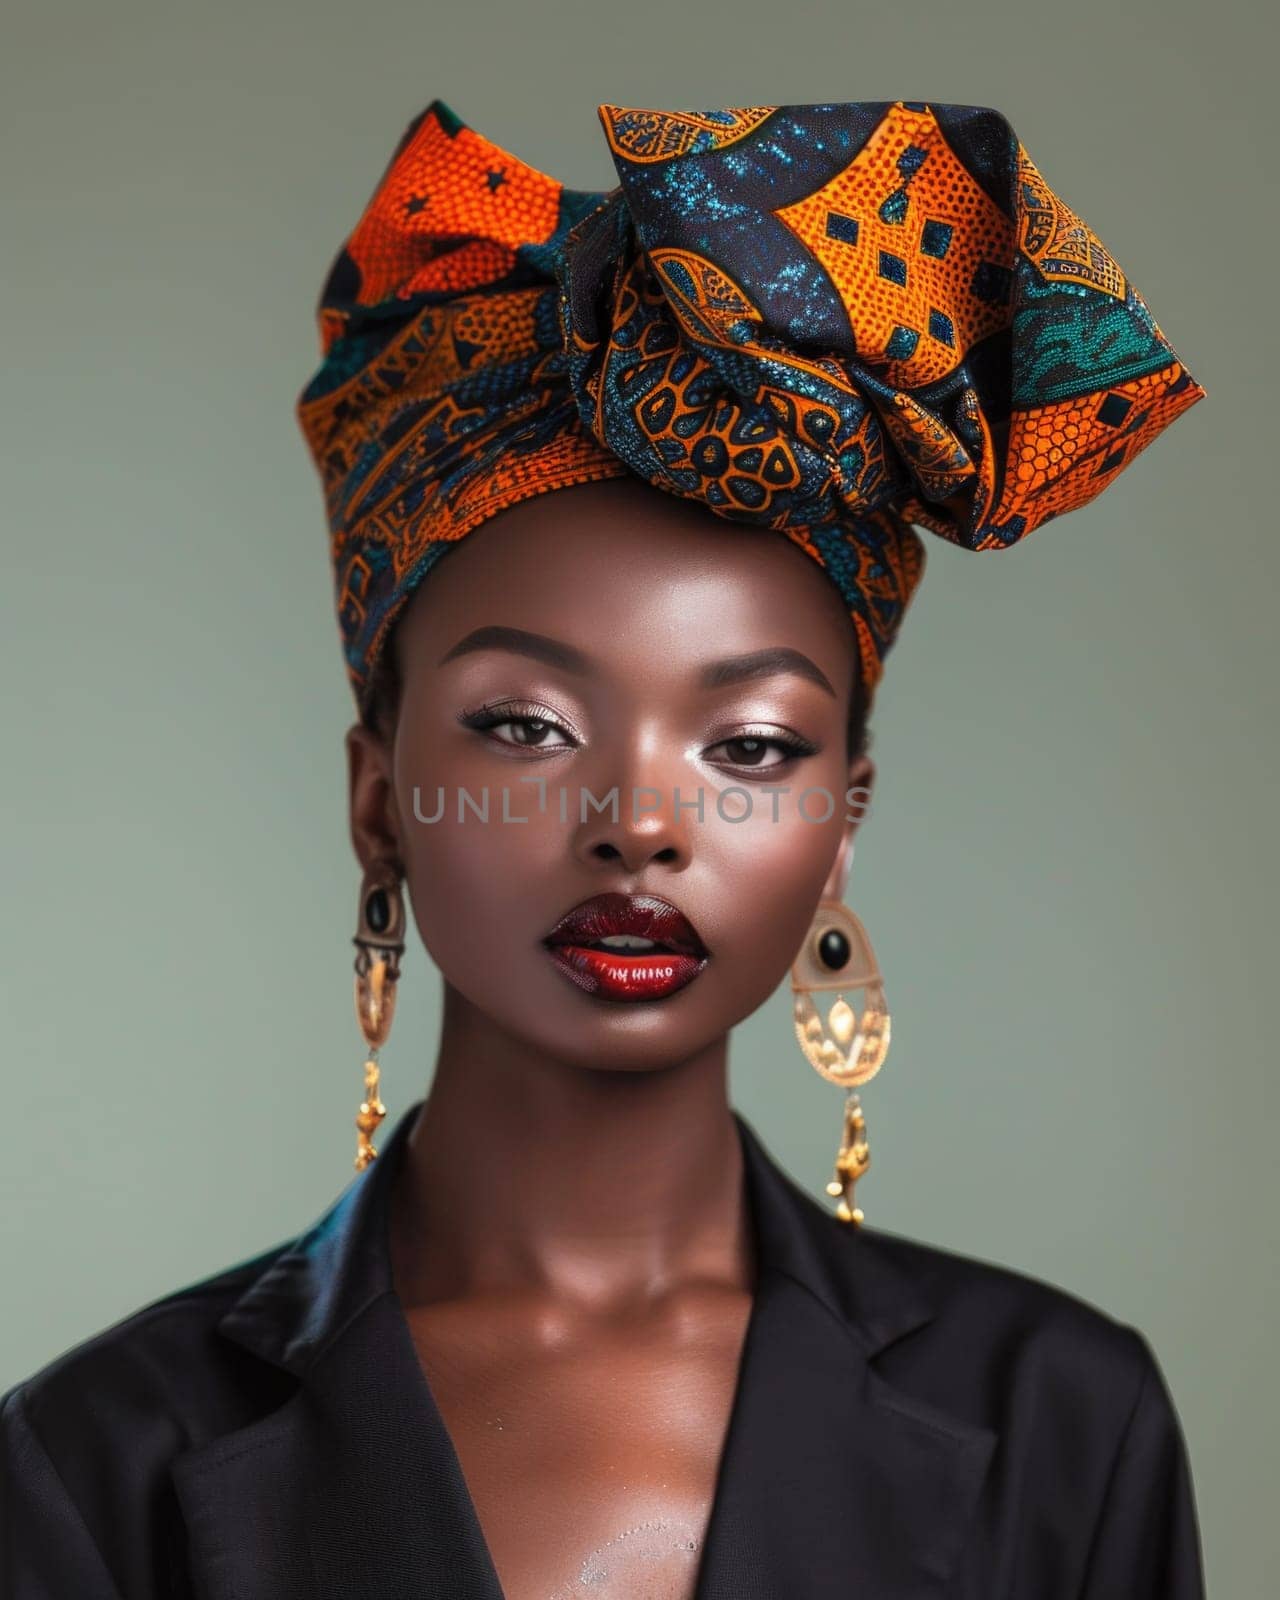 Graceful portrait of stylish african american woman in amazing african turban